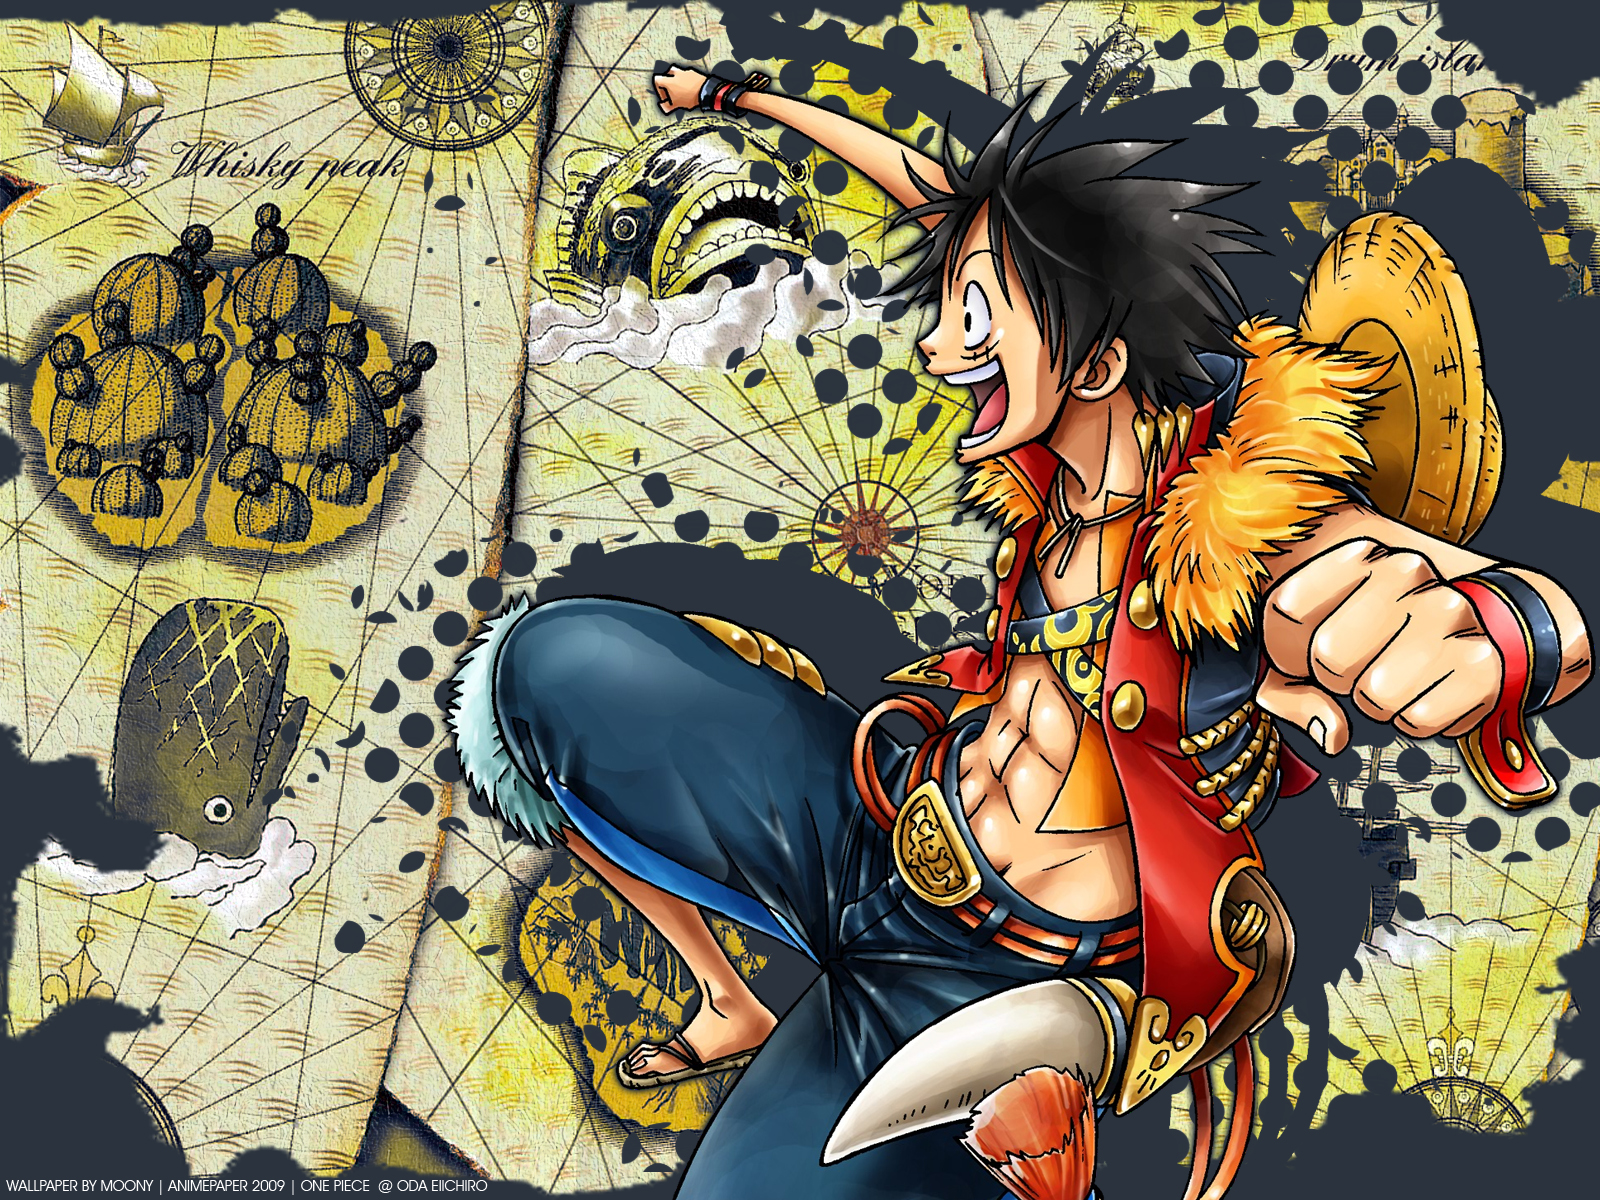 One Piece Luffy Wallpaper High Quality 10826 - HD Wallpapers Site